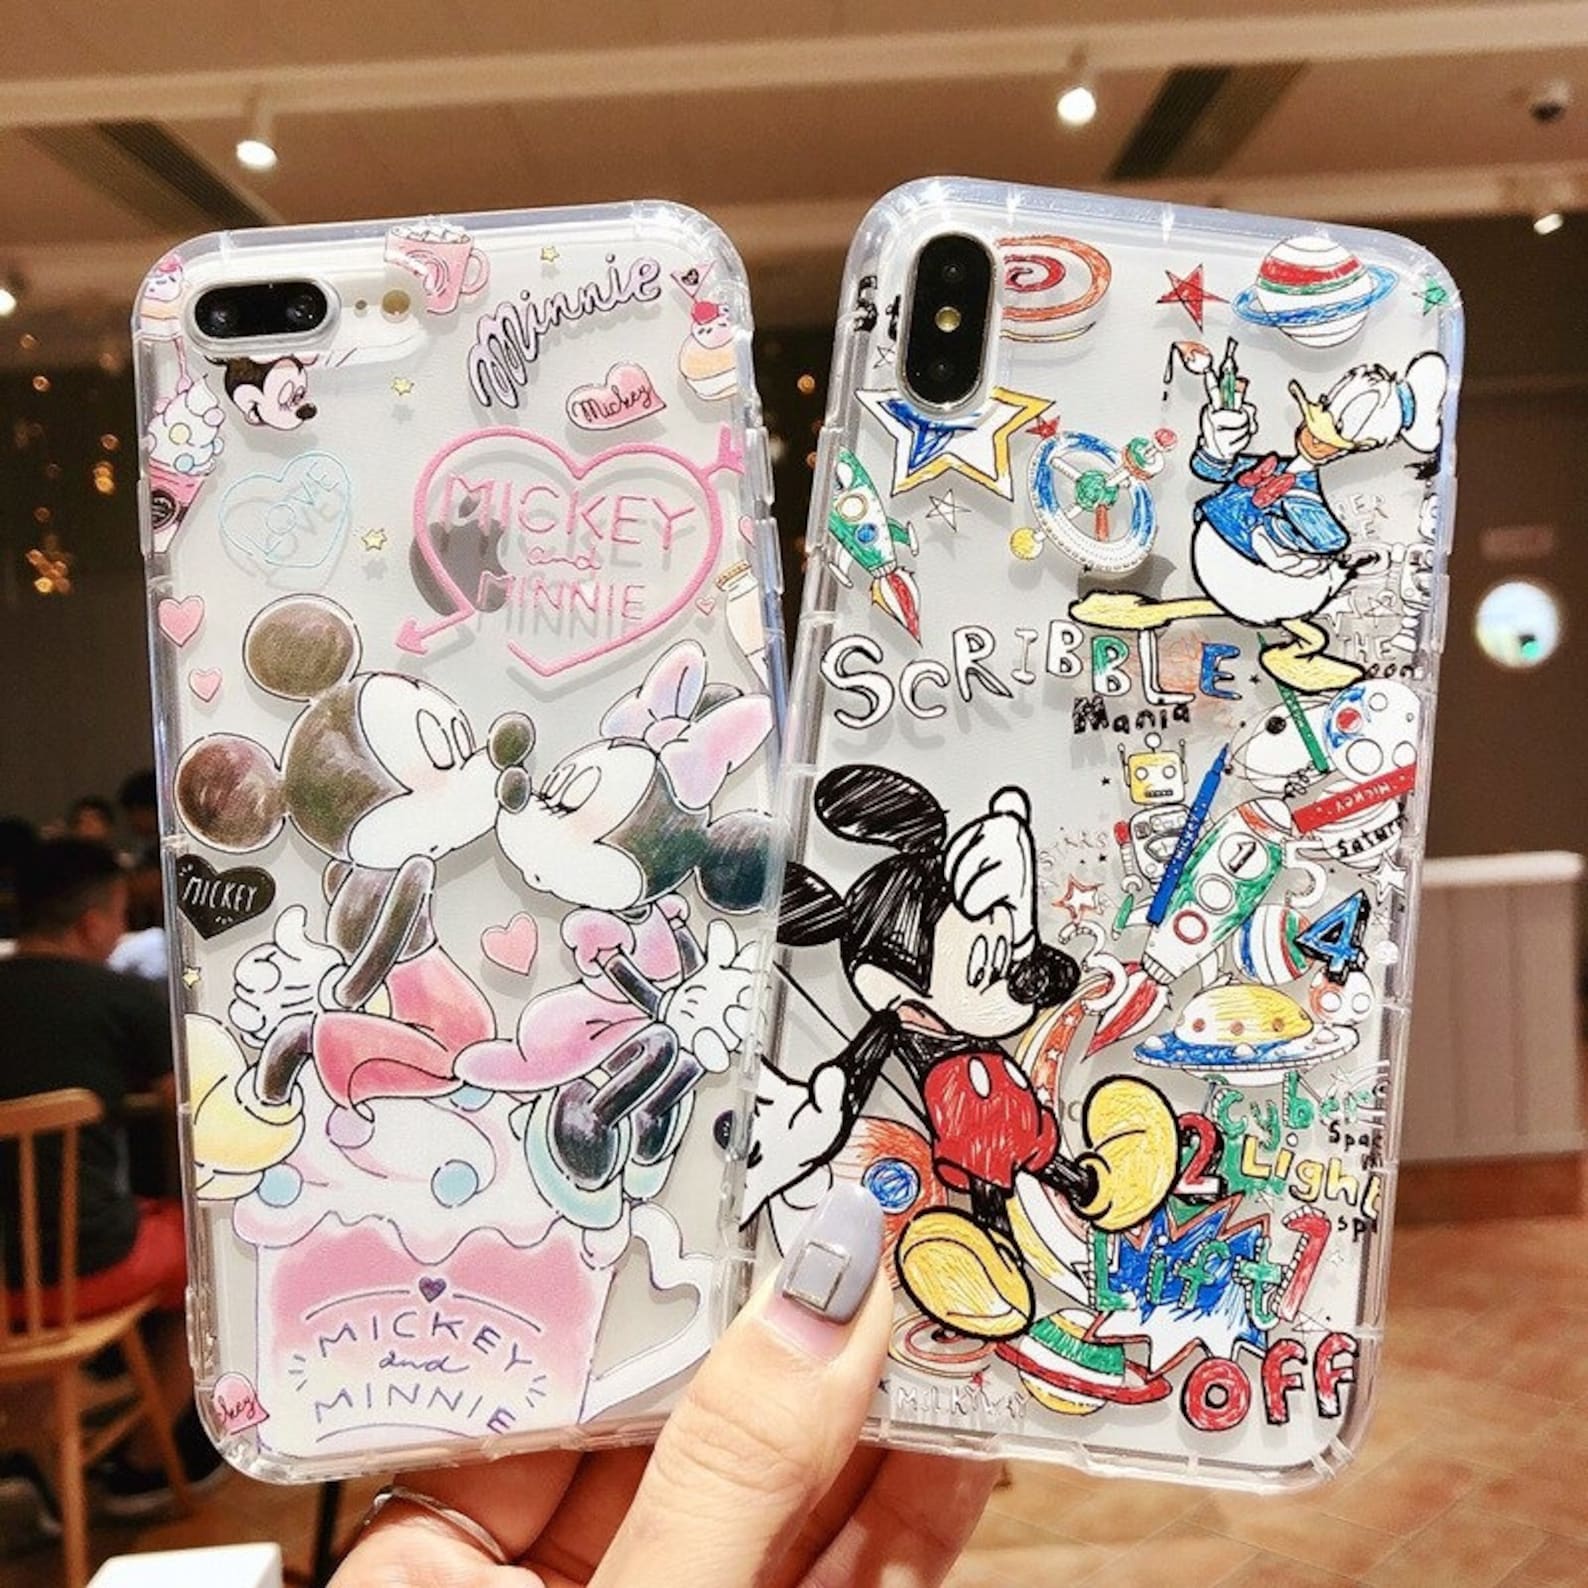 Disney Mickey Minnie Phone Cases For Iphone 12 Pro Max 11 Pro Etsy